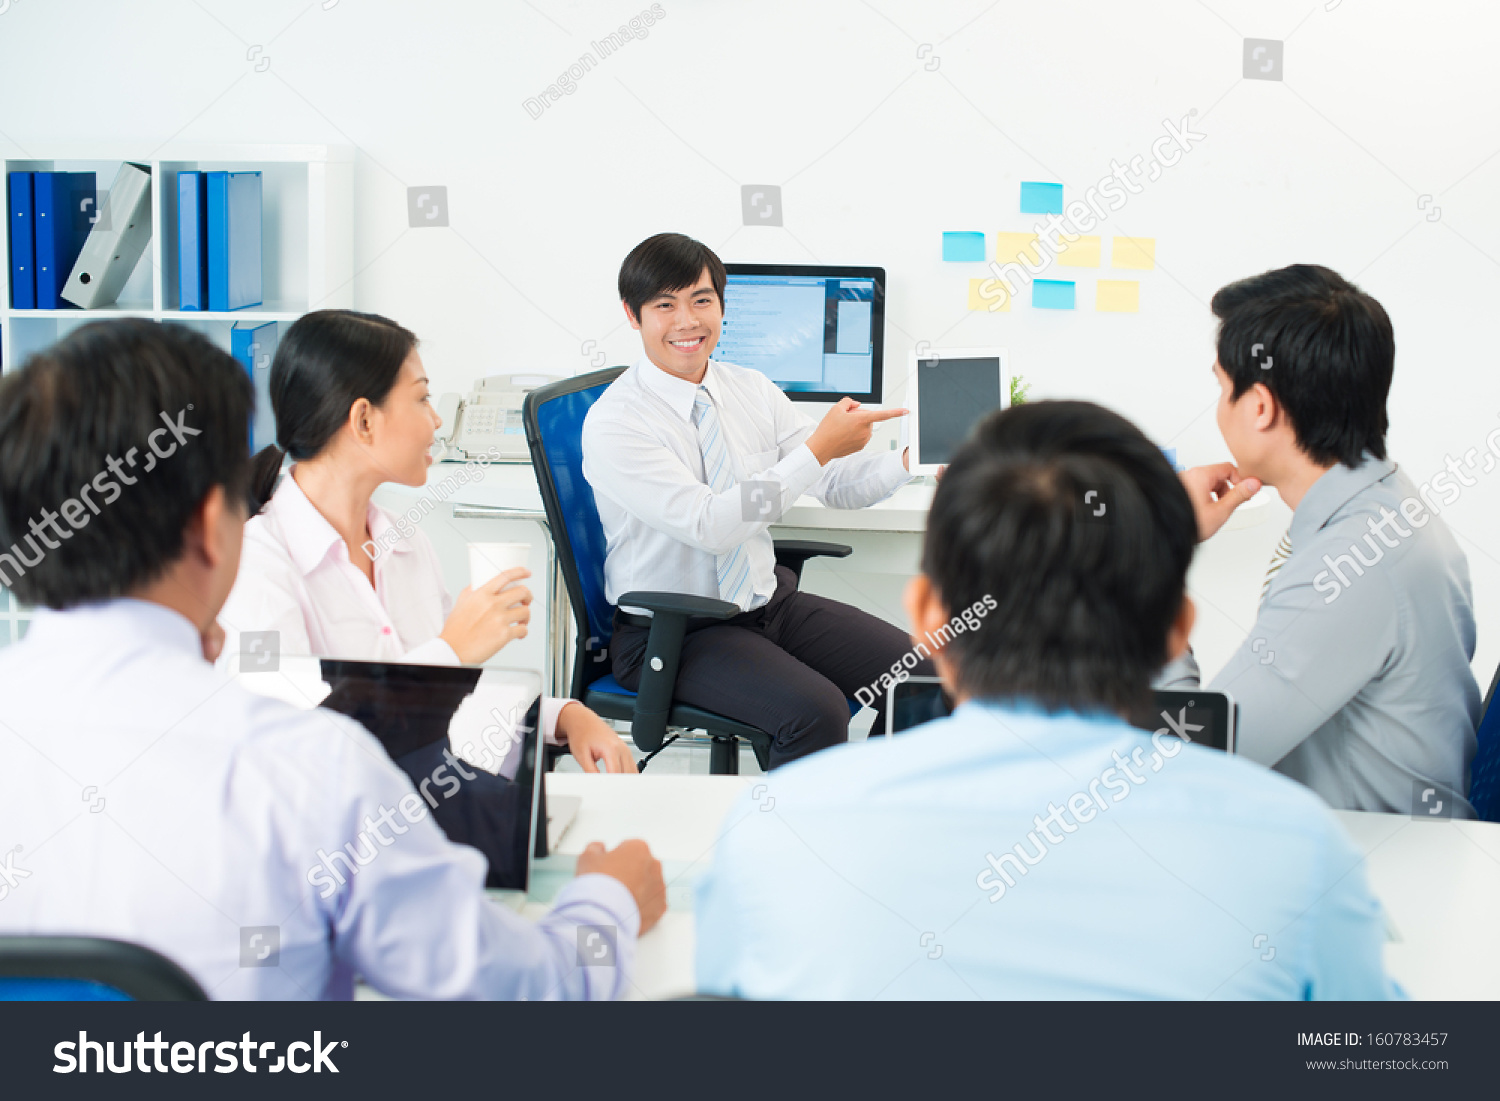 Image of a businessman presenting something at the seminar using tablet at the office on the foreground #160783457